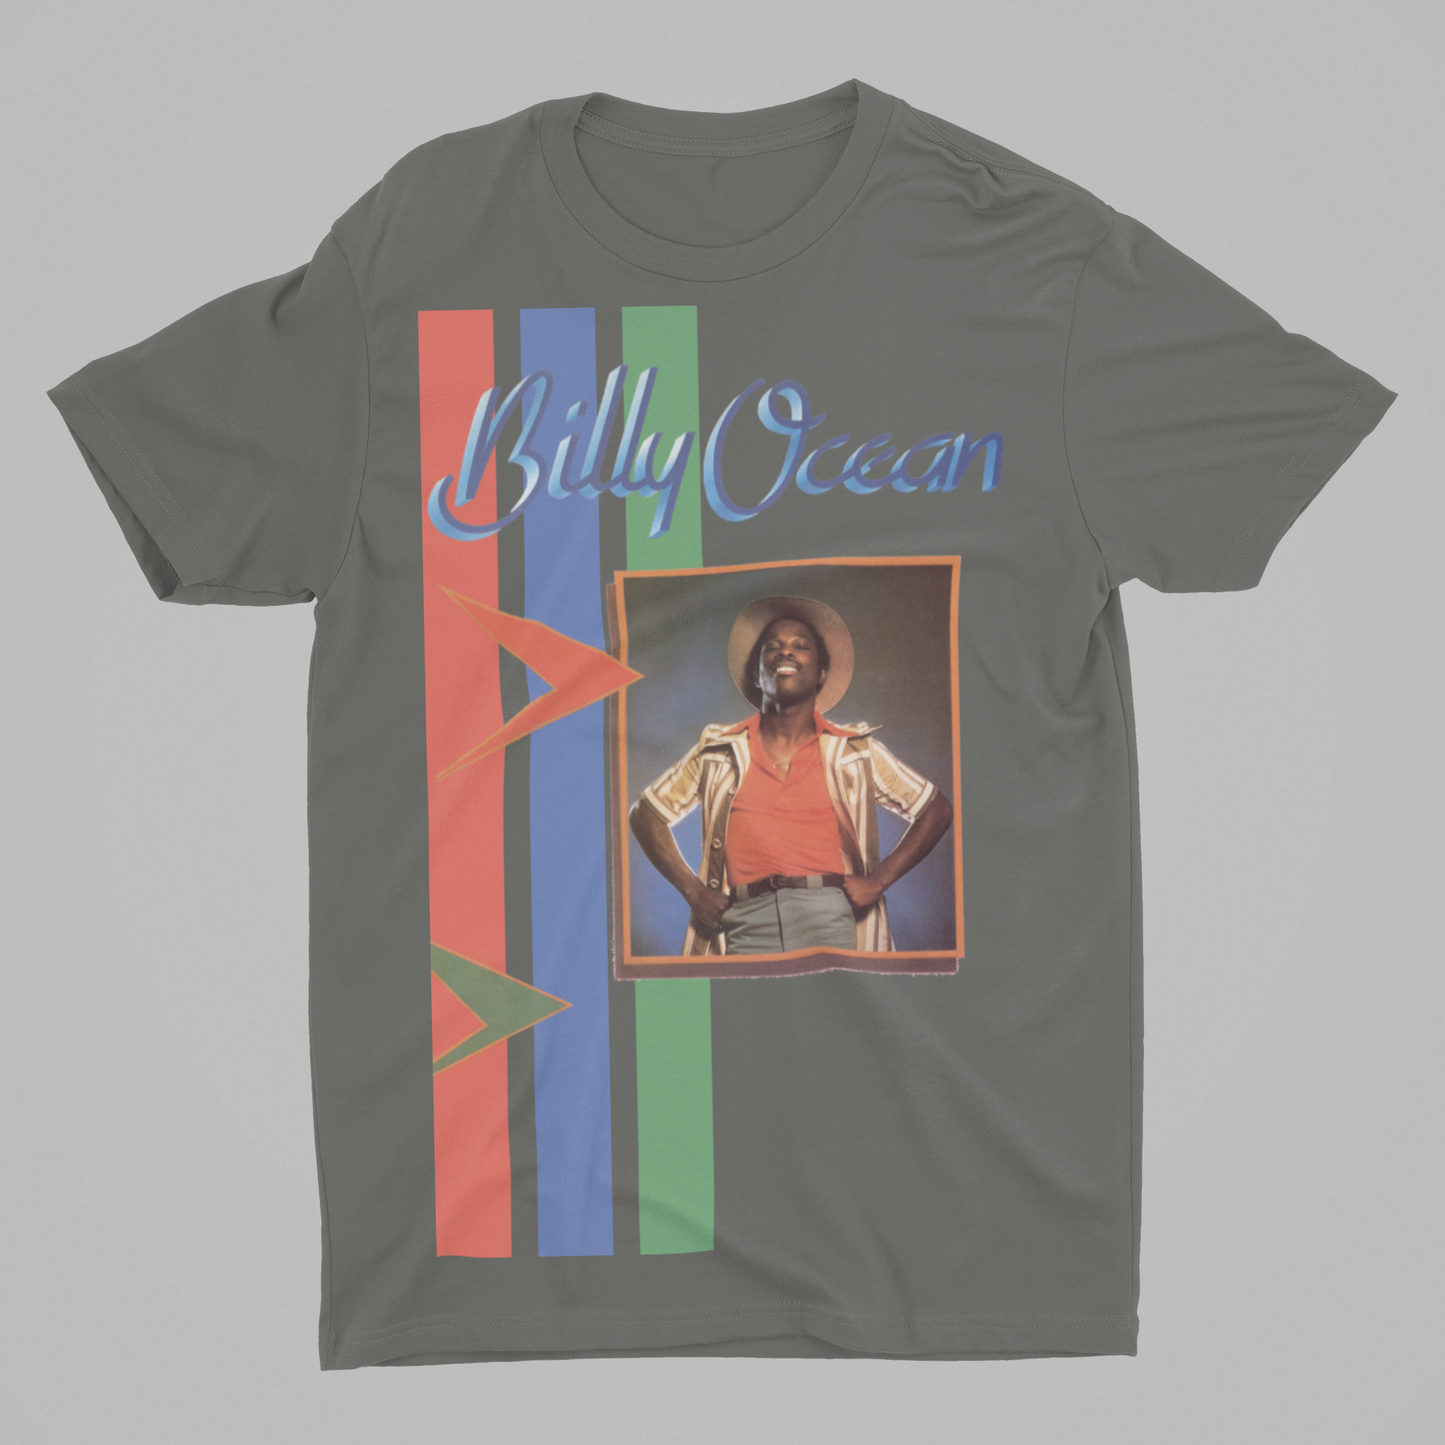 'BILLY OCEAN' - EXPLODED TEESHIRT FRONT PRINT ONLY